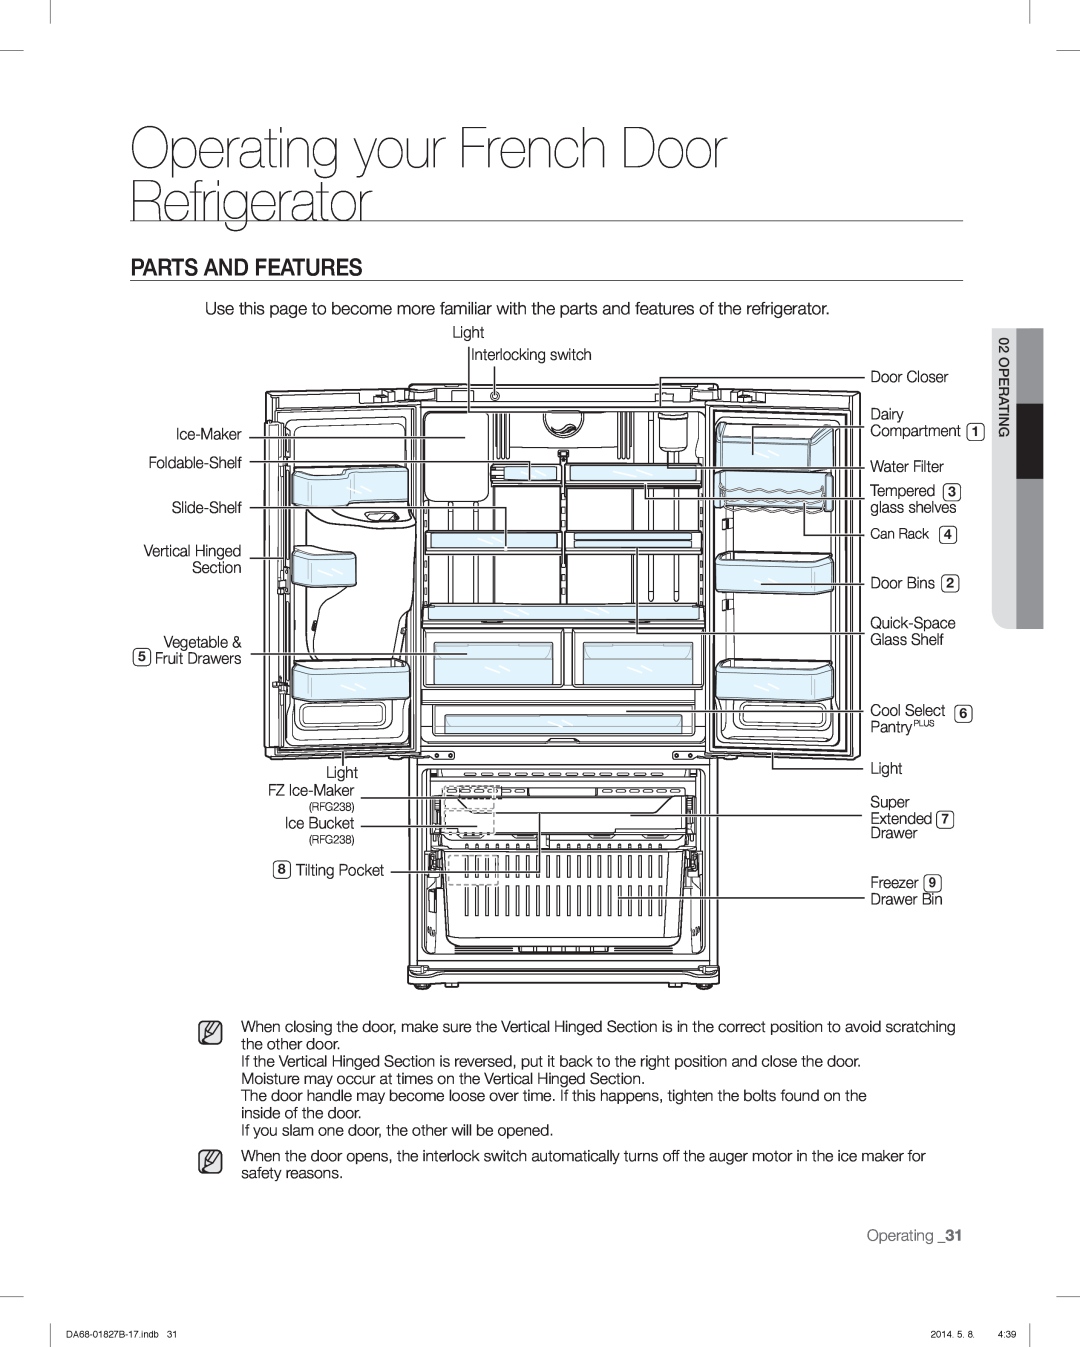 Samsung RFG237AAWP, RFG237AARS, RFG237AABP user manual Parts And Features, Operating your French Door Refrigerator 